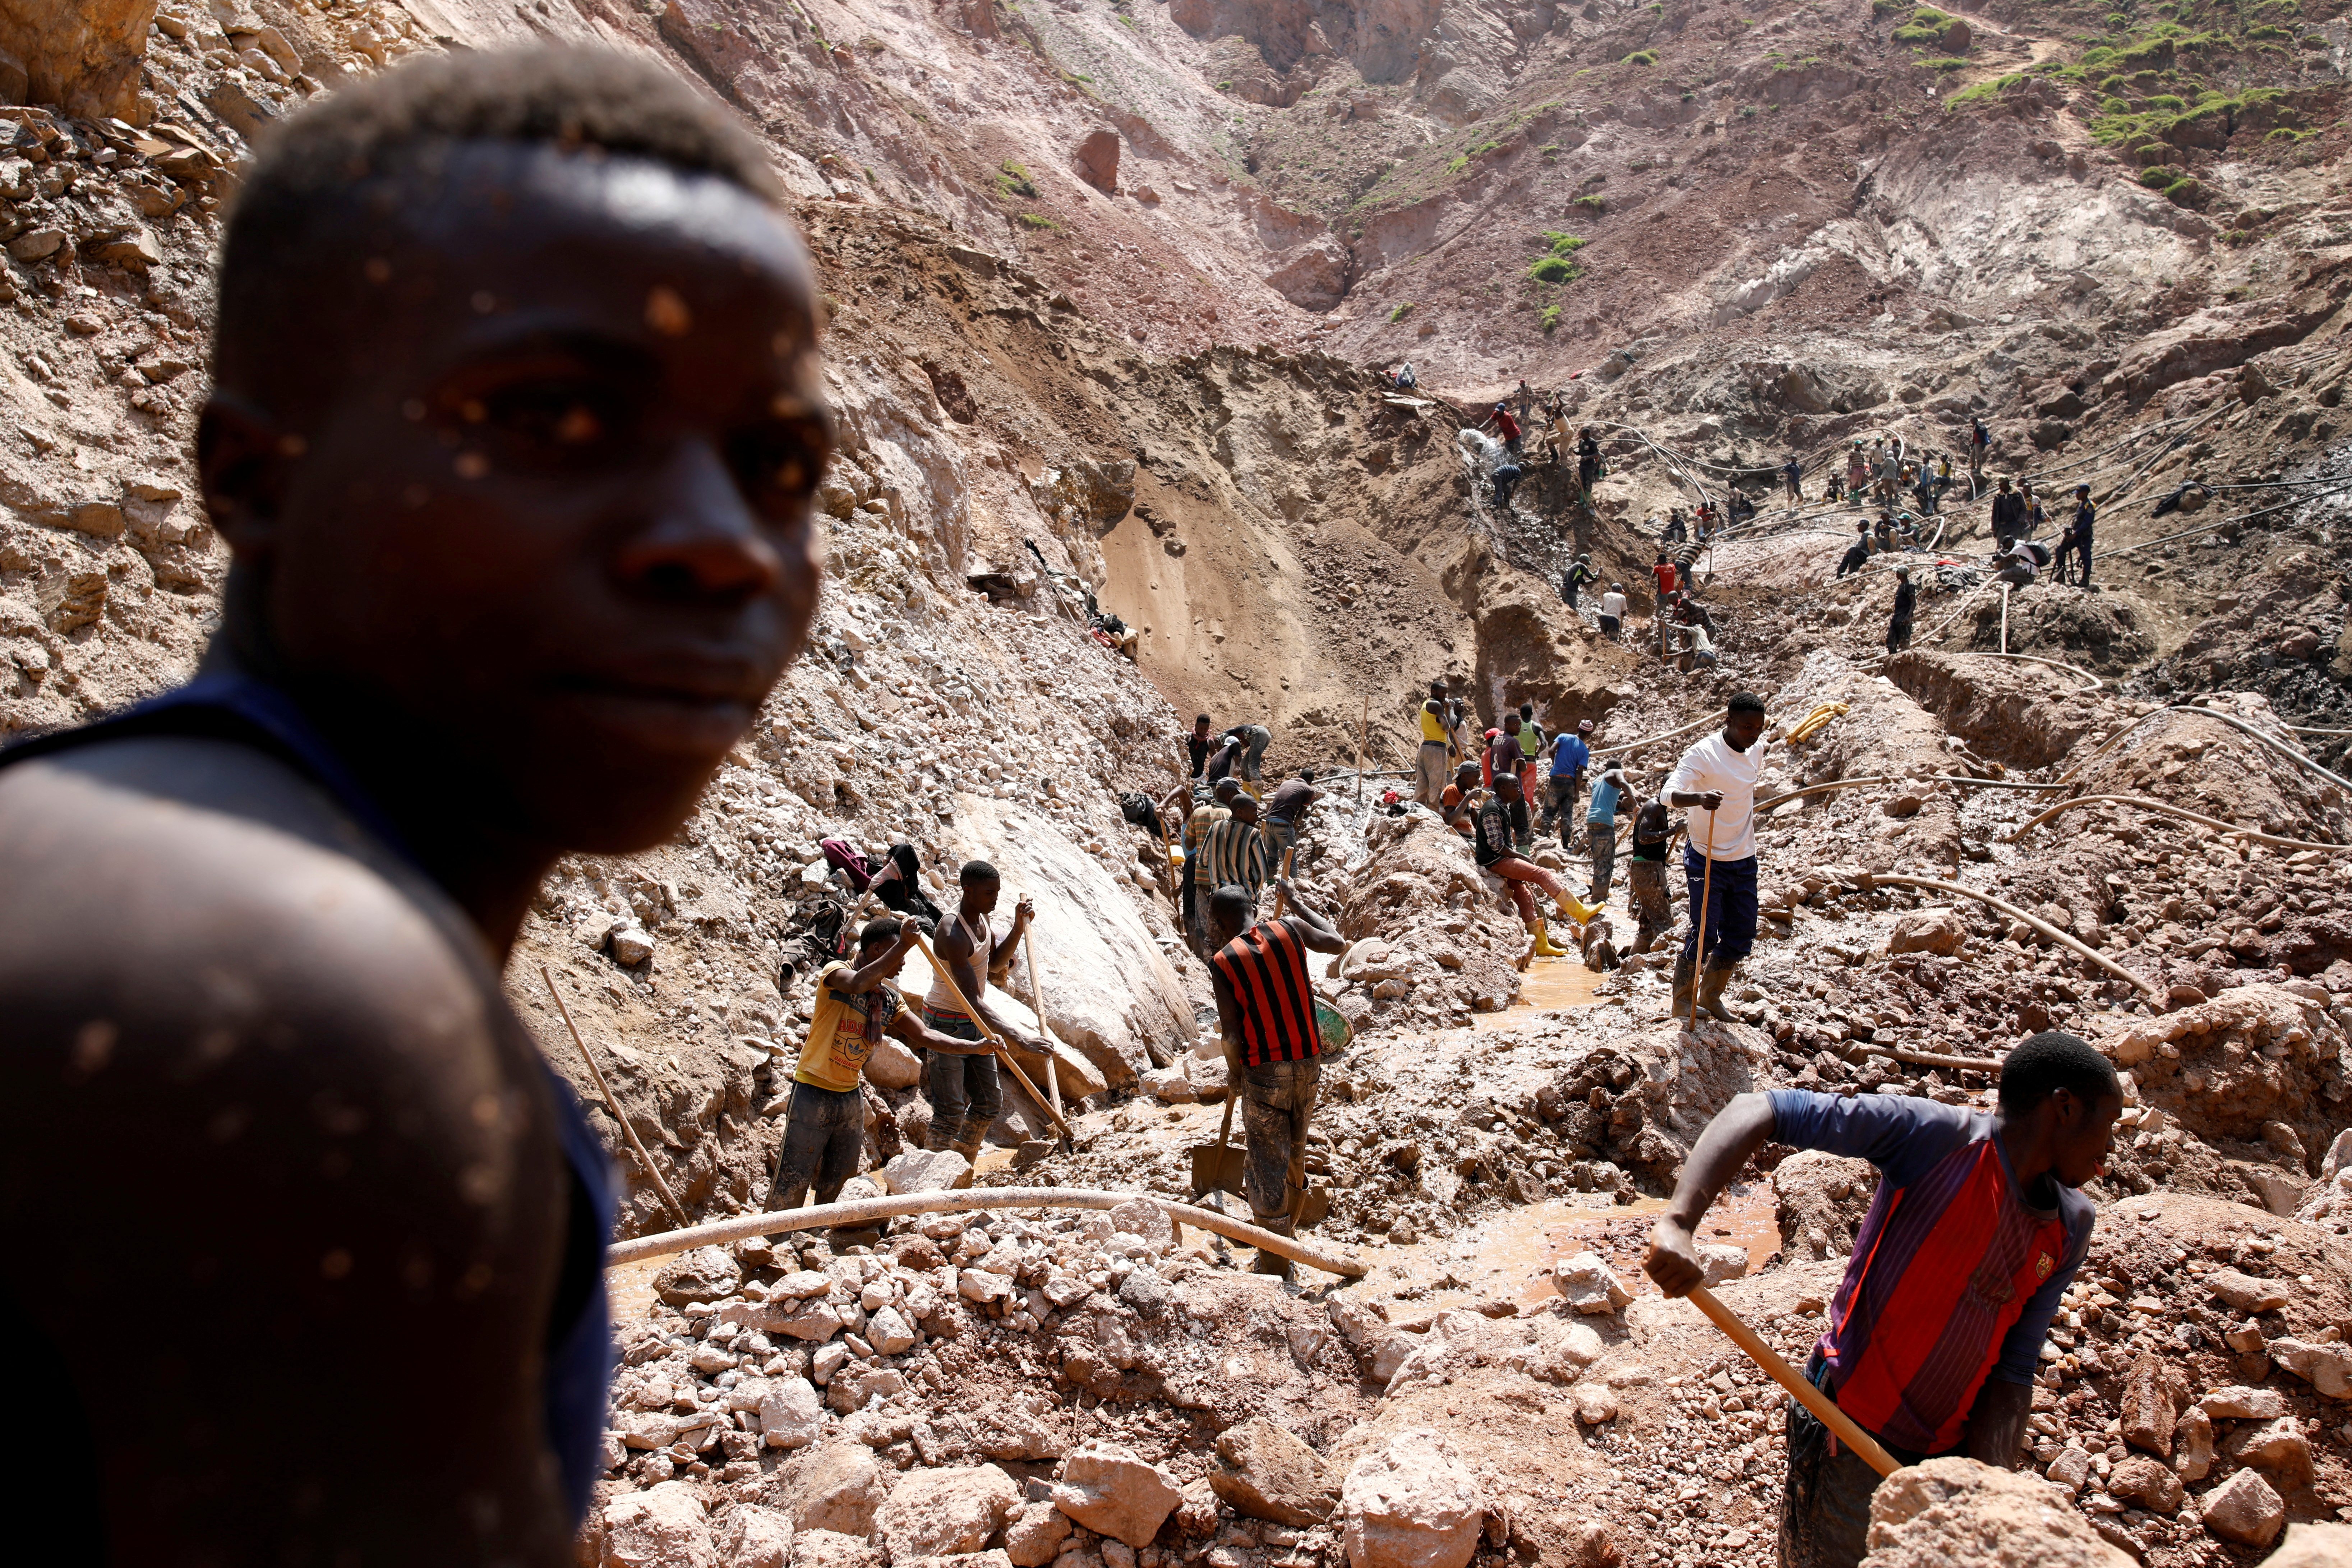 Labourers work at an open shaft of the SMB coltan mine near the town of Rubaya